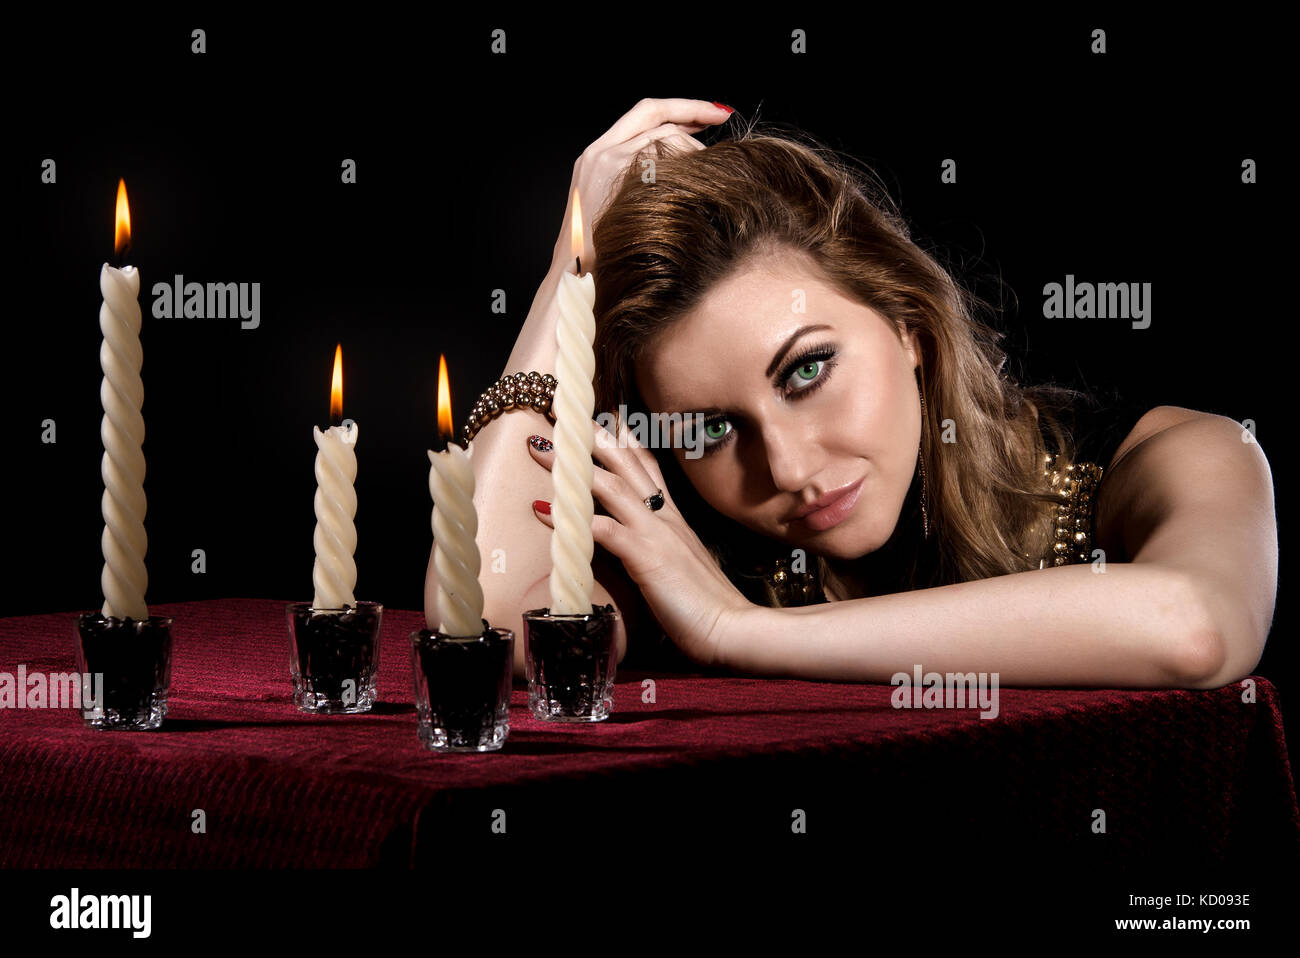 Beautiful young woman with bright green eyes near the candles over black background Stock Photo